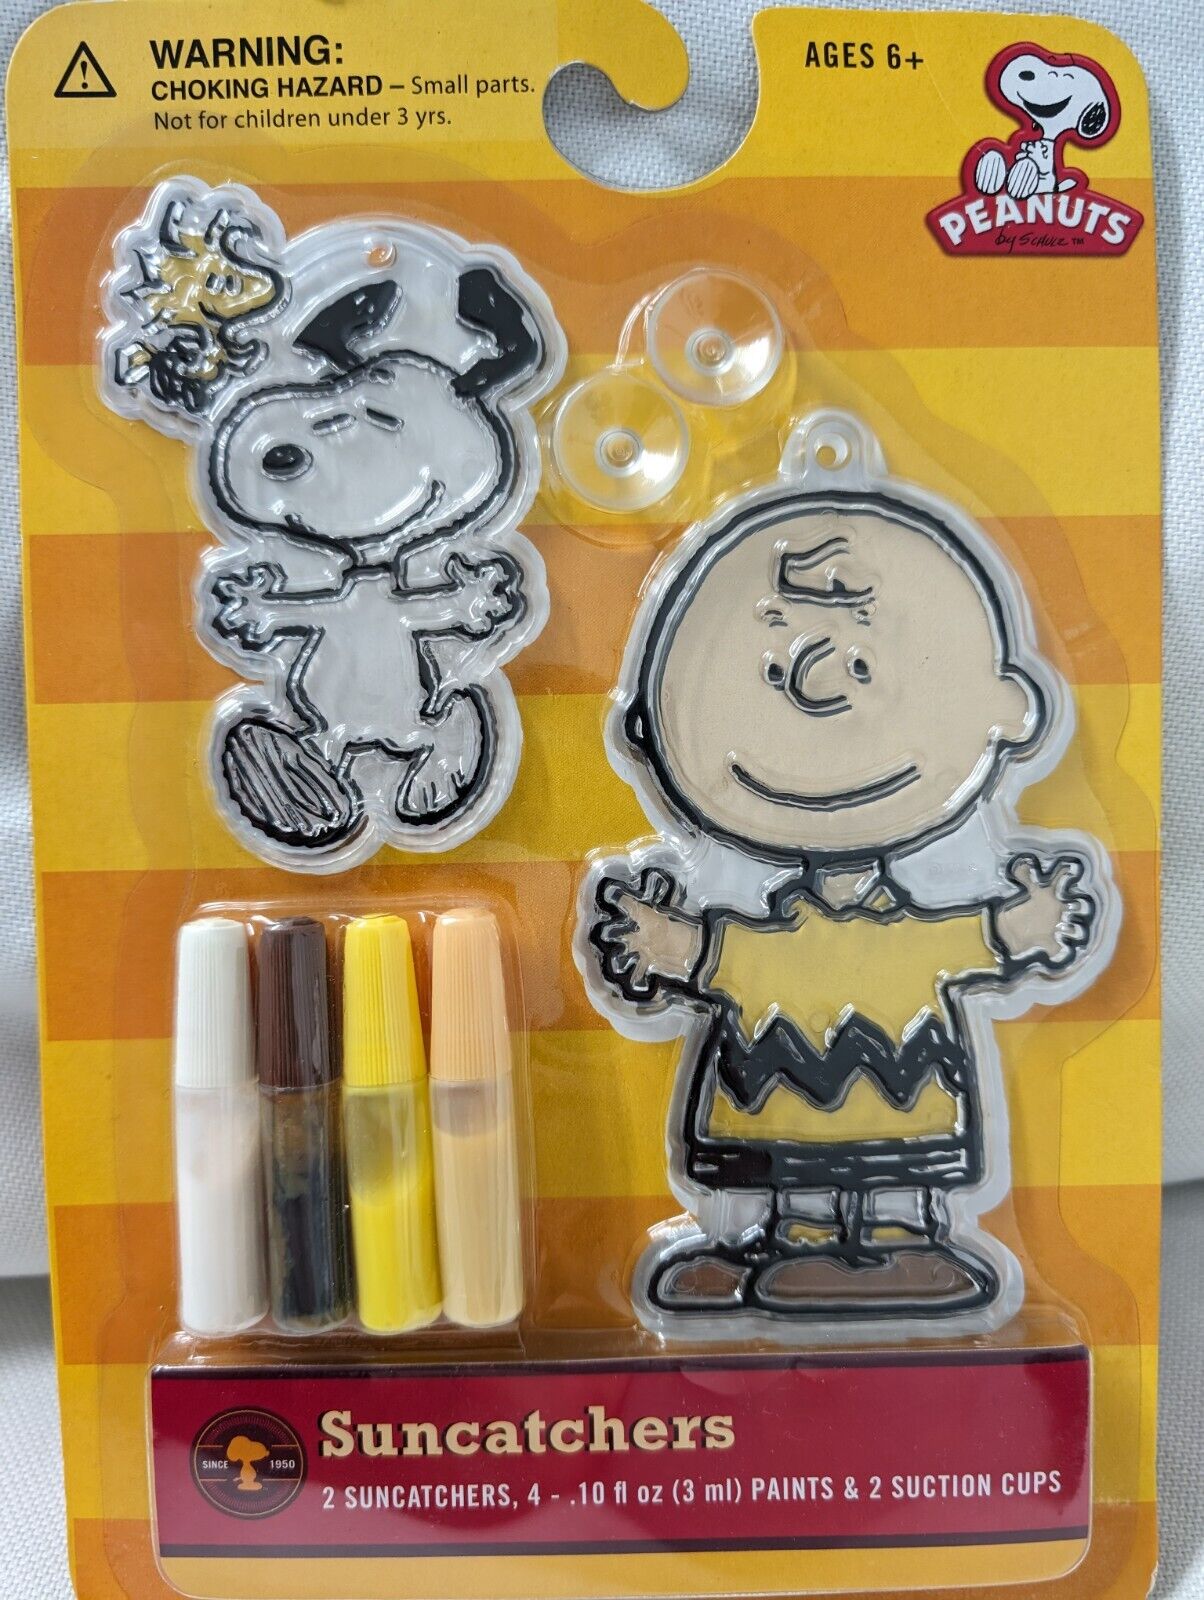 Peanuts Suncatcher Features Snoopy W/Woodstock And Charlie Brown NOS Colorbok